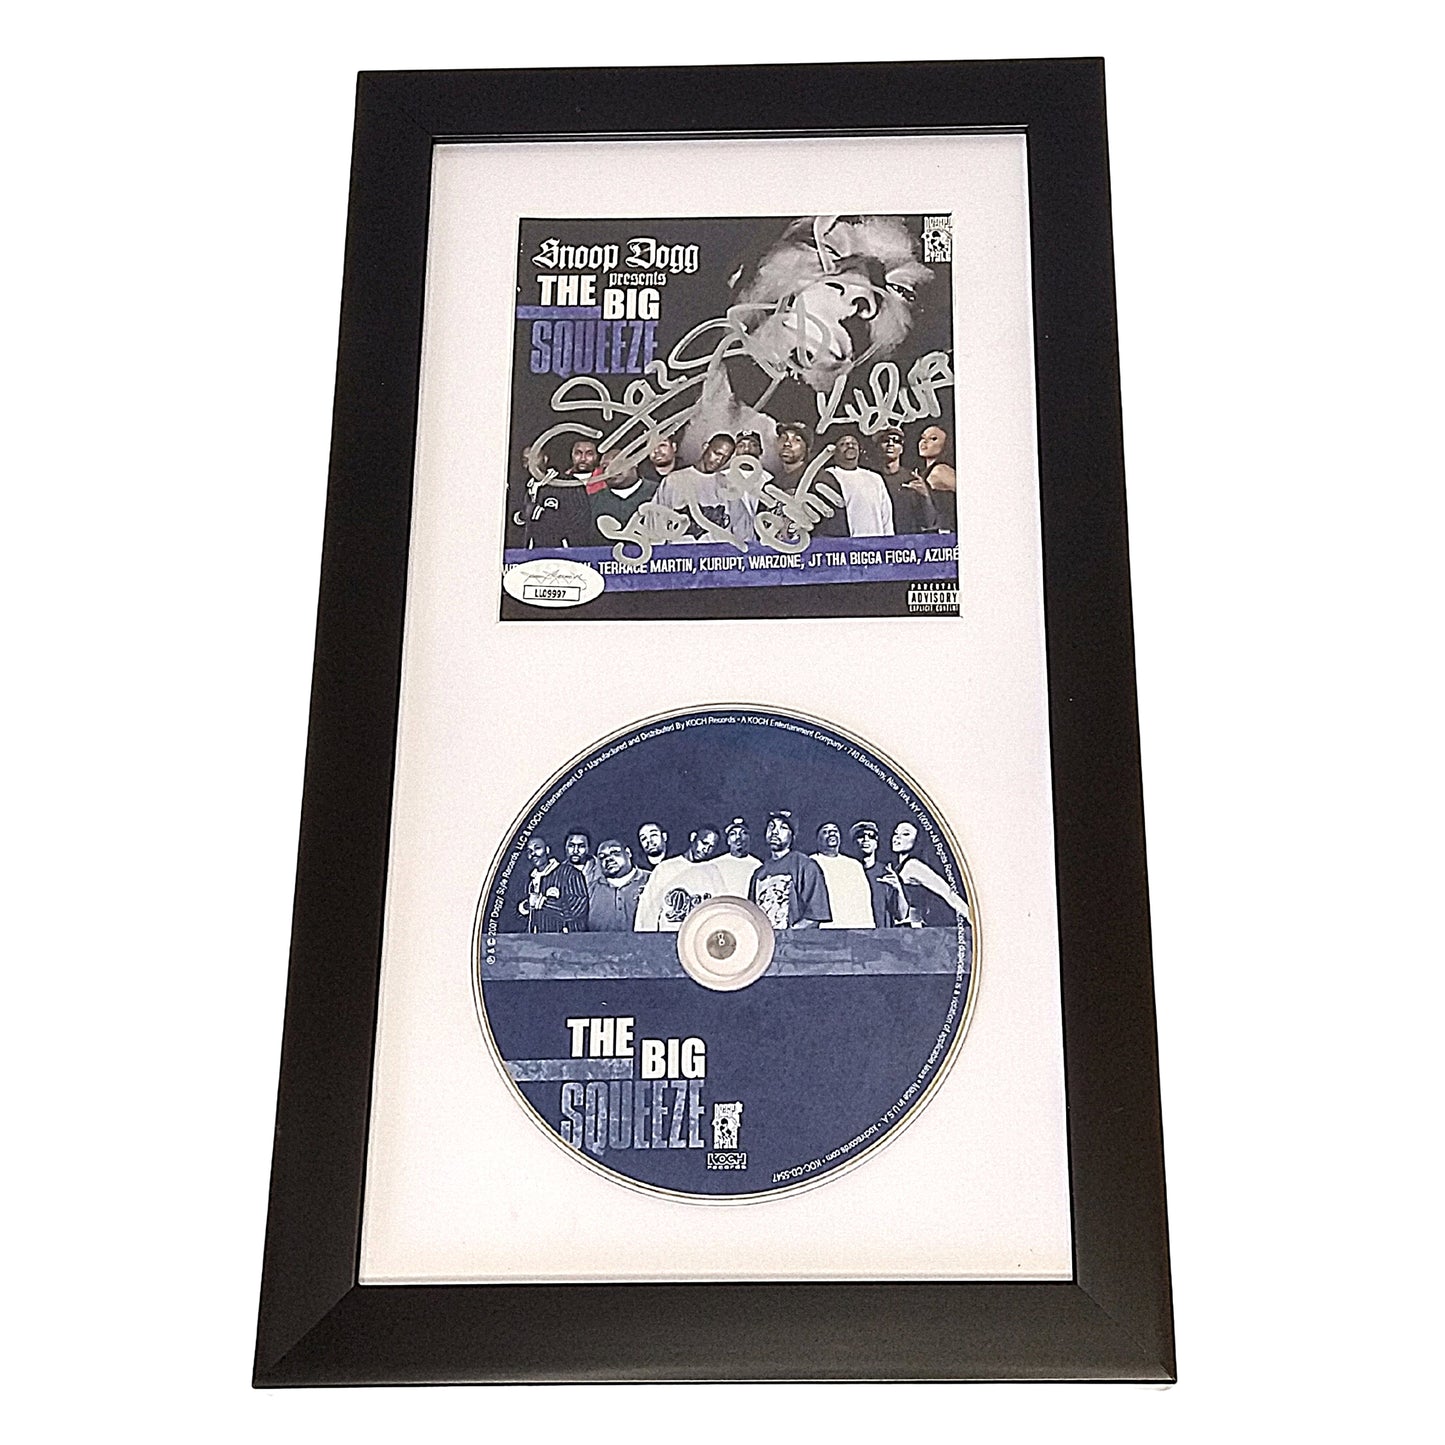 Music- Autographed- Snoop Dogg, Kurupt, MC Eiht and Soopafly Signed The Big Squeeze Framed Compact Disc Cover Booklet with Disc- JSA Authentication- 104